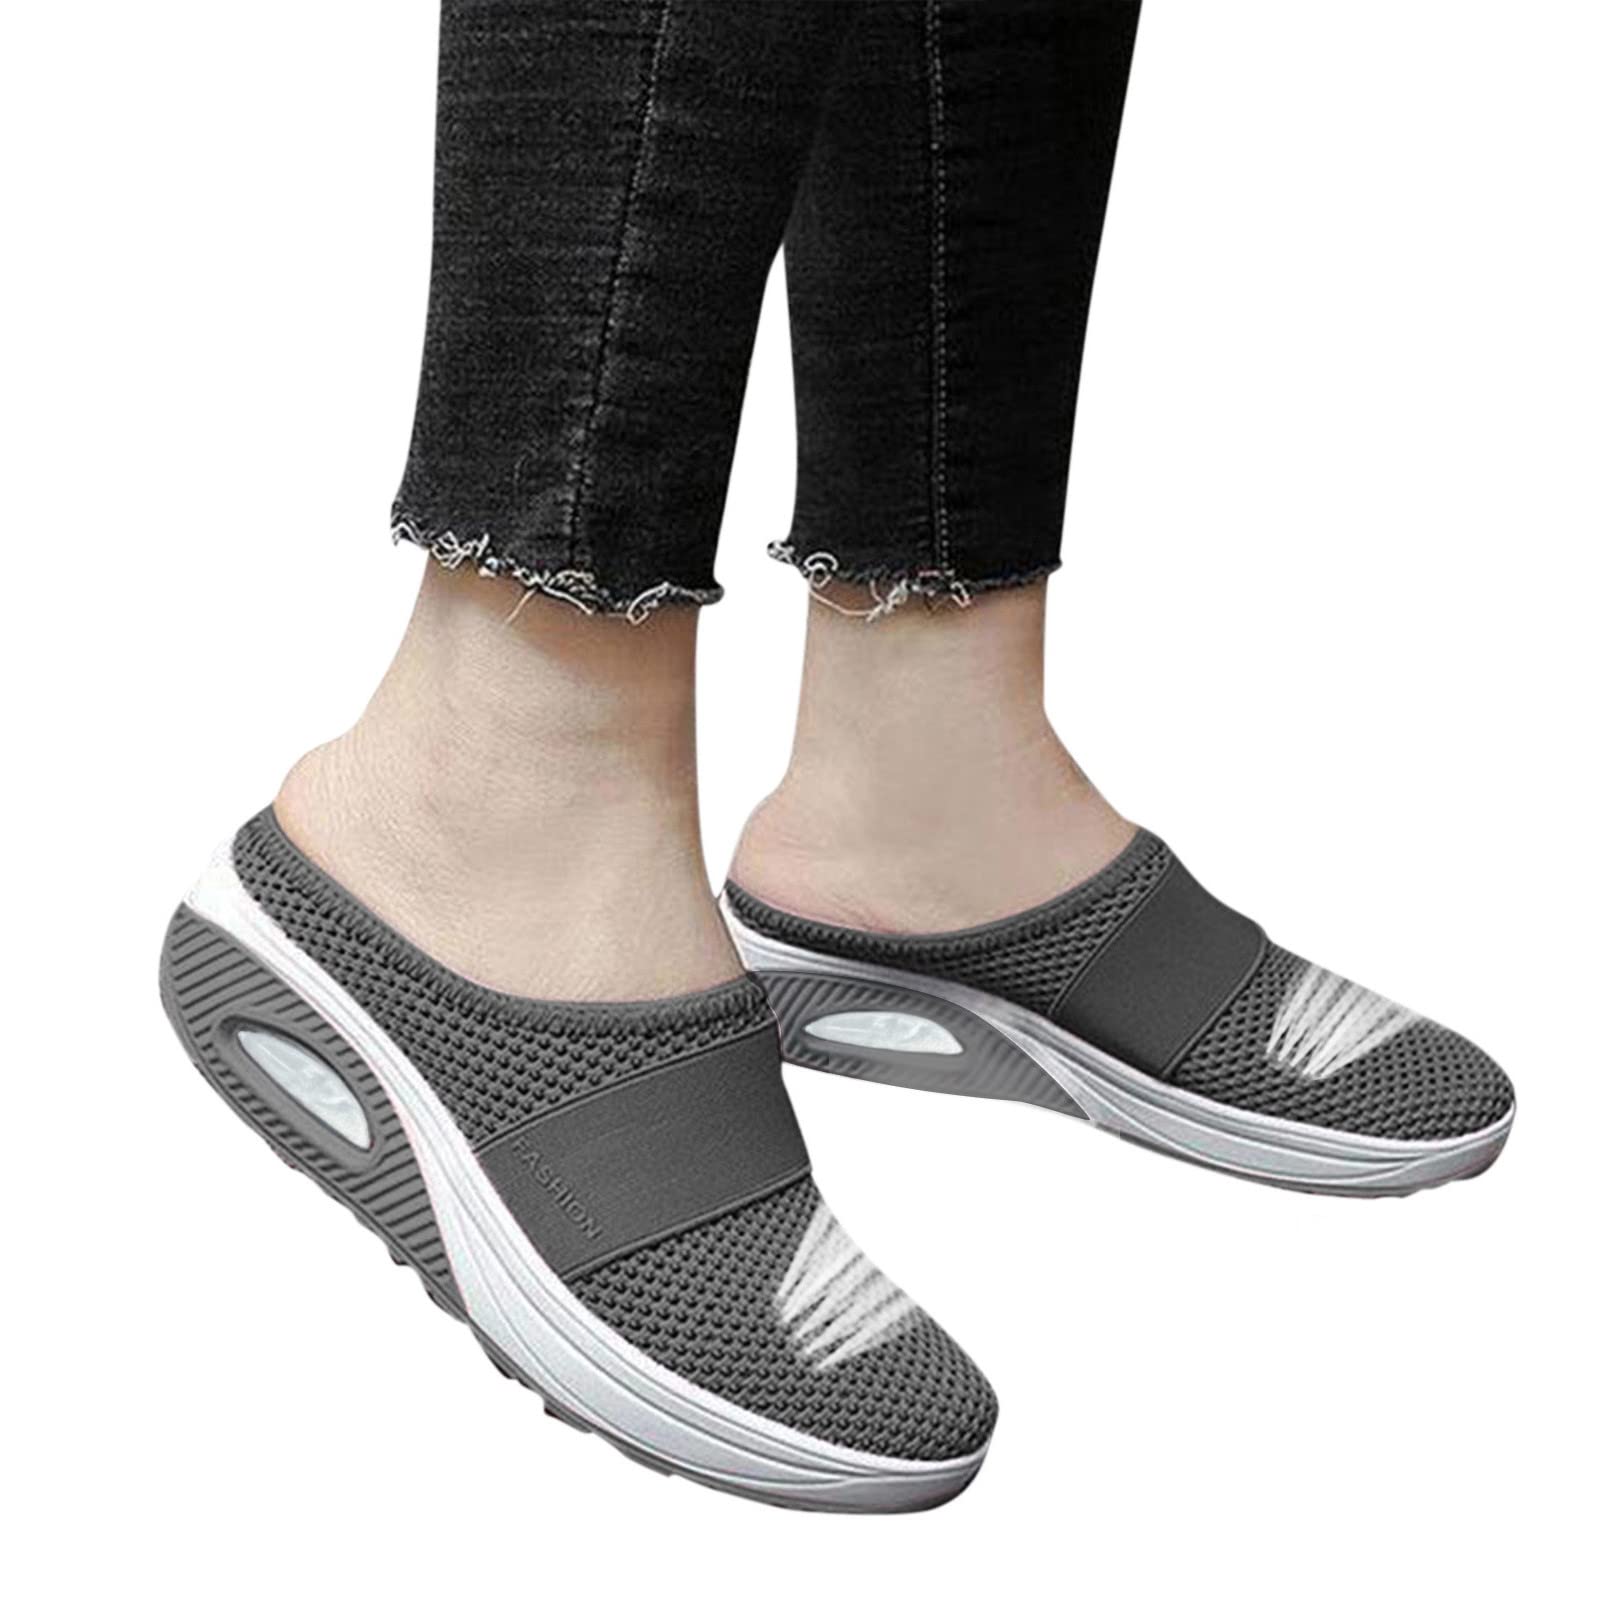 Women's Fashion Sneakers Wide Width Canvas Breathable, Canvas High Top Sneakers for Women Knit Mesh Womens Sandals with Heels Short Heel Casual Shoes Unisex Fashion Autumn